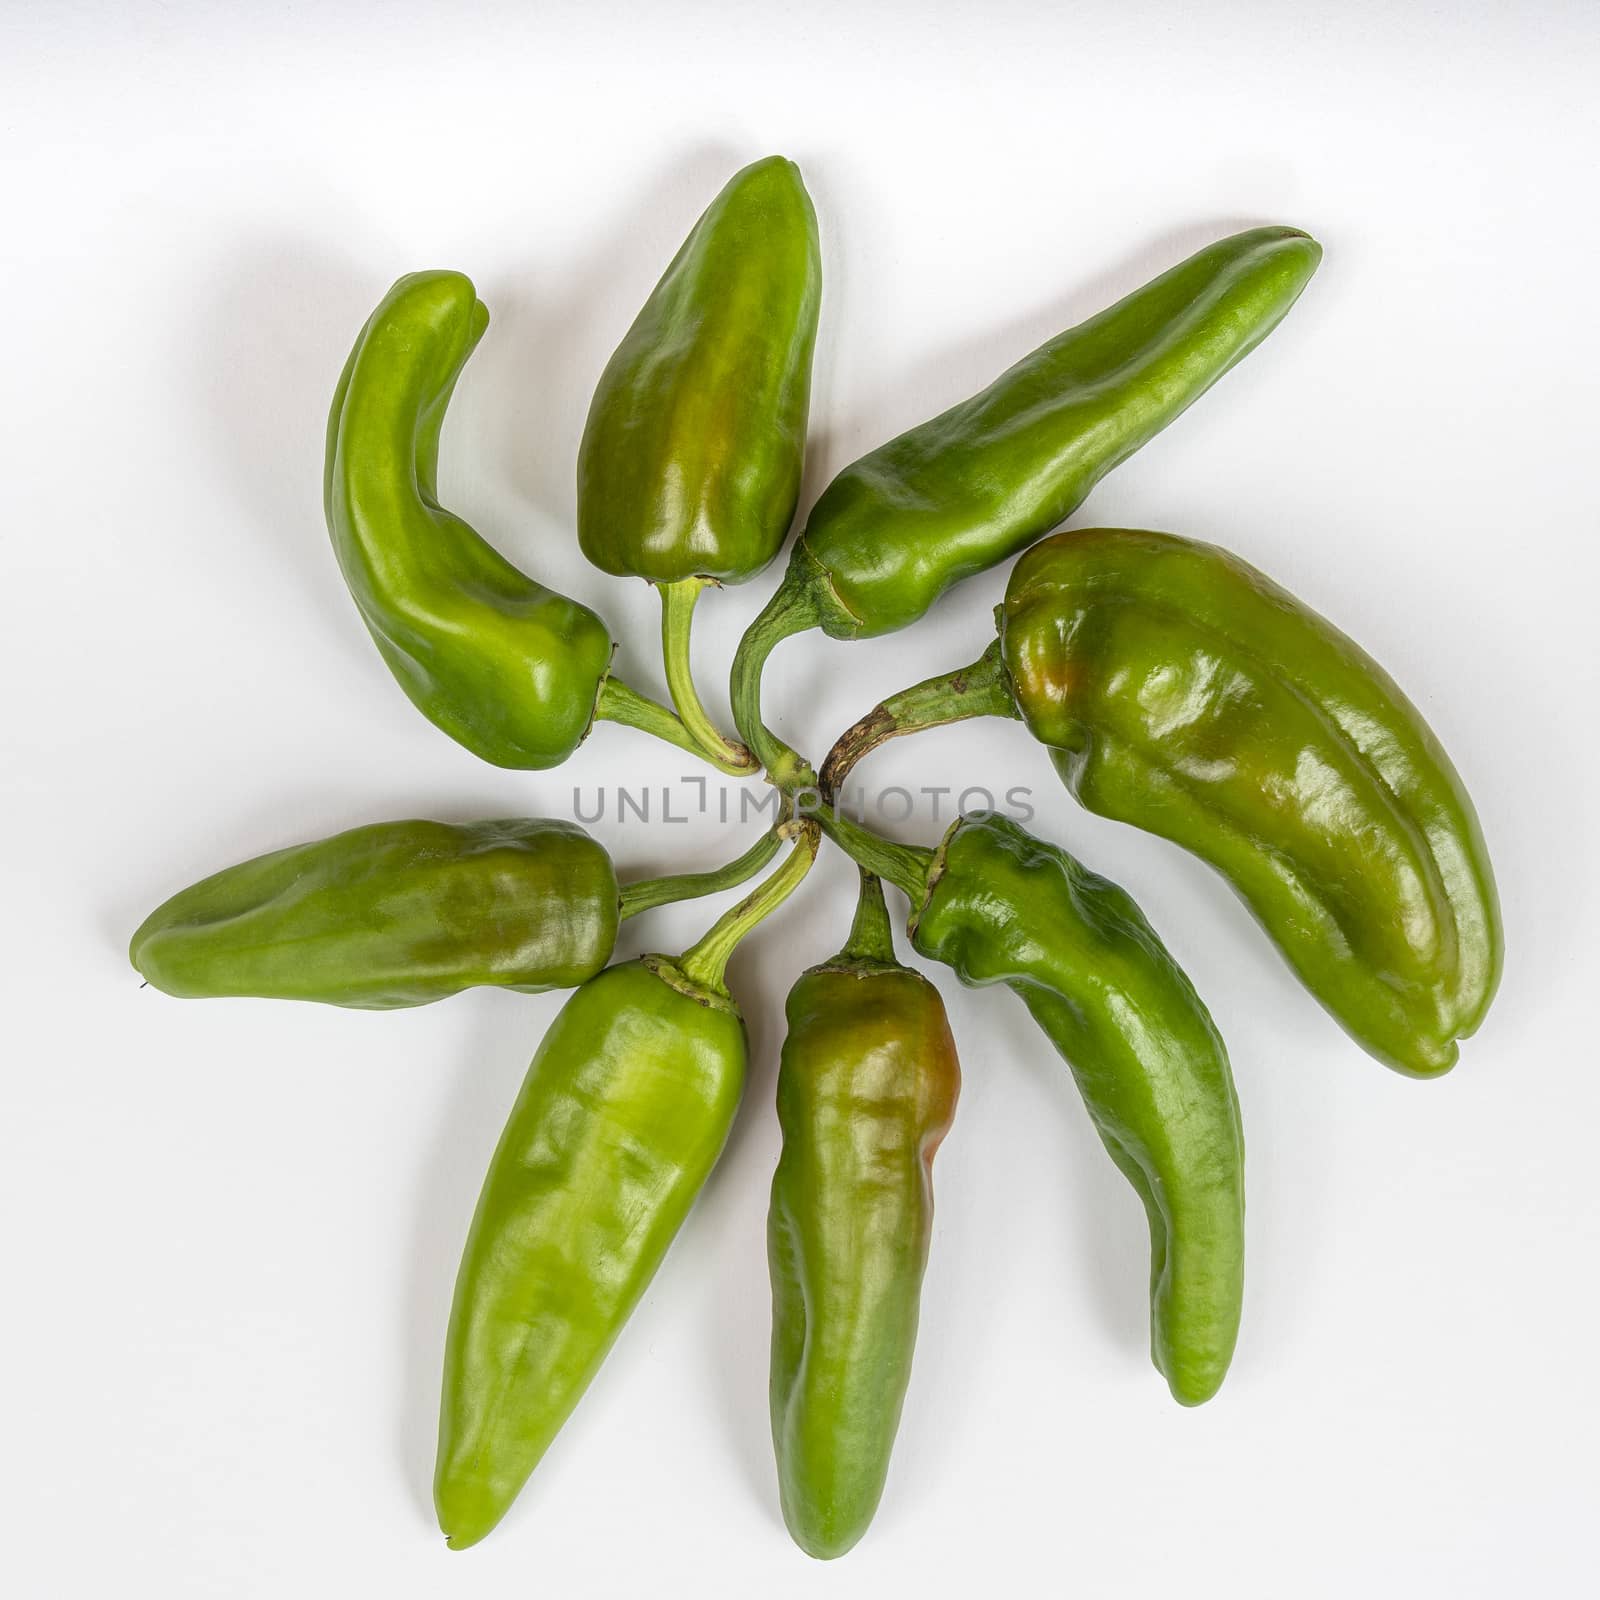 A composition of some green peppers on a colored surface